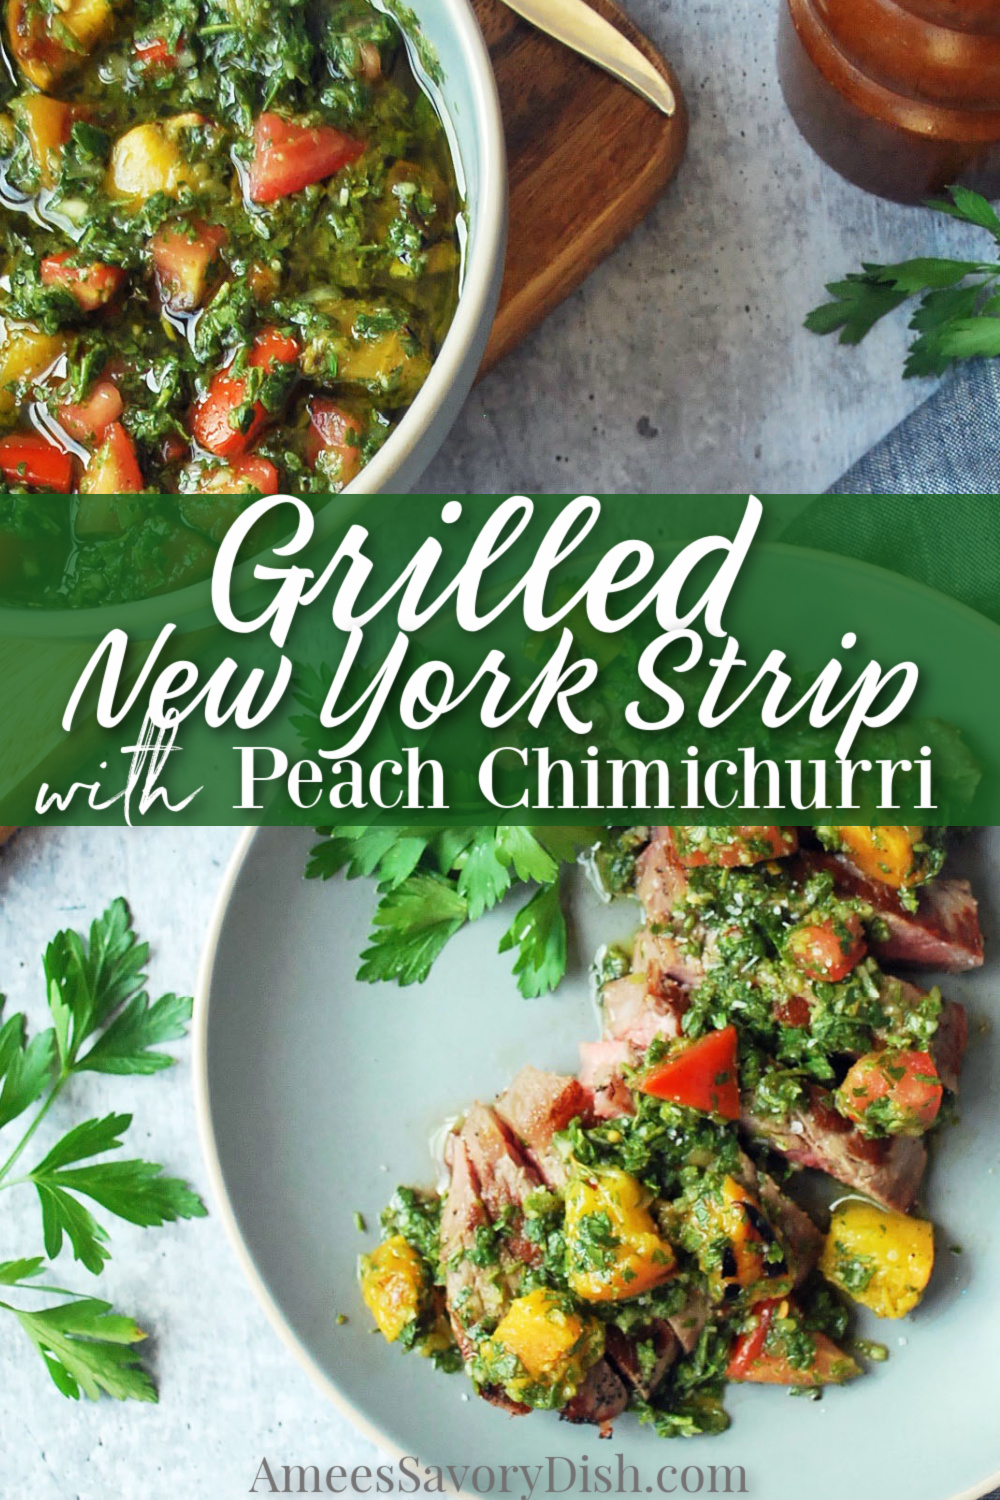 #Sponsored A recipe for grilled New York Strip Steak topped with a flavorful chimichurri sauce made with fresh herbs, grilled peaches, and heirloom tomatoes.  This might just be the best steak dinner that I've ever eaten! #grilledsteak #newyorkstrip #steakrecipes #chimichurrisauce #BeefItsWhatsForDinner #NicelyDone #UnitedWeSteak #BeefFarmersandRanchers @beeffordinner via @Ameessavorydish